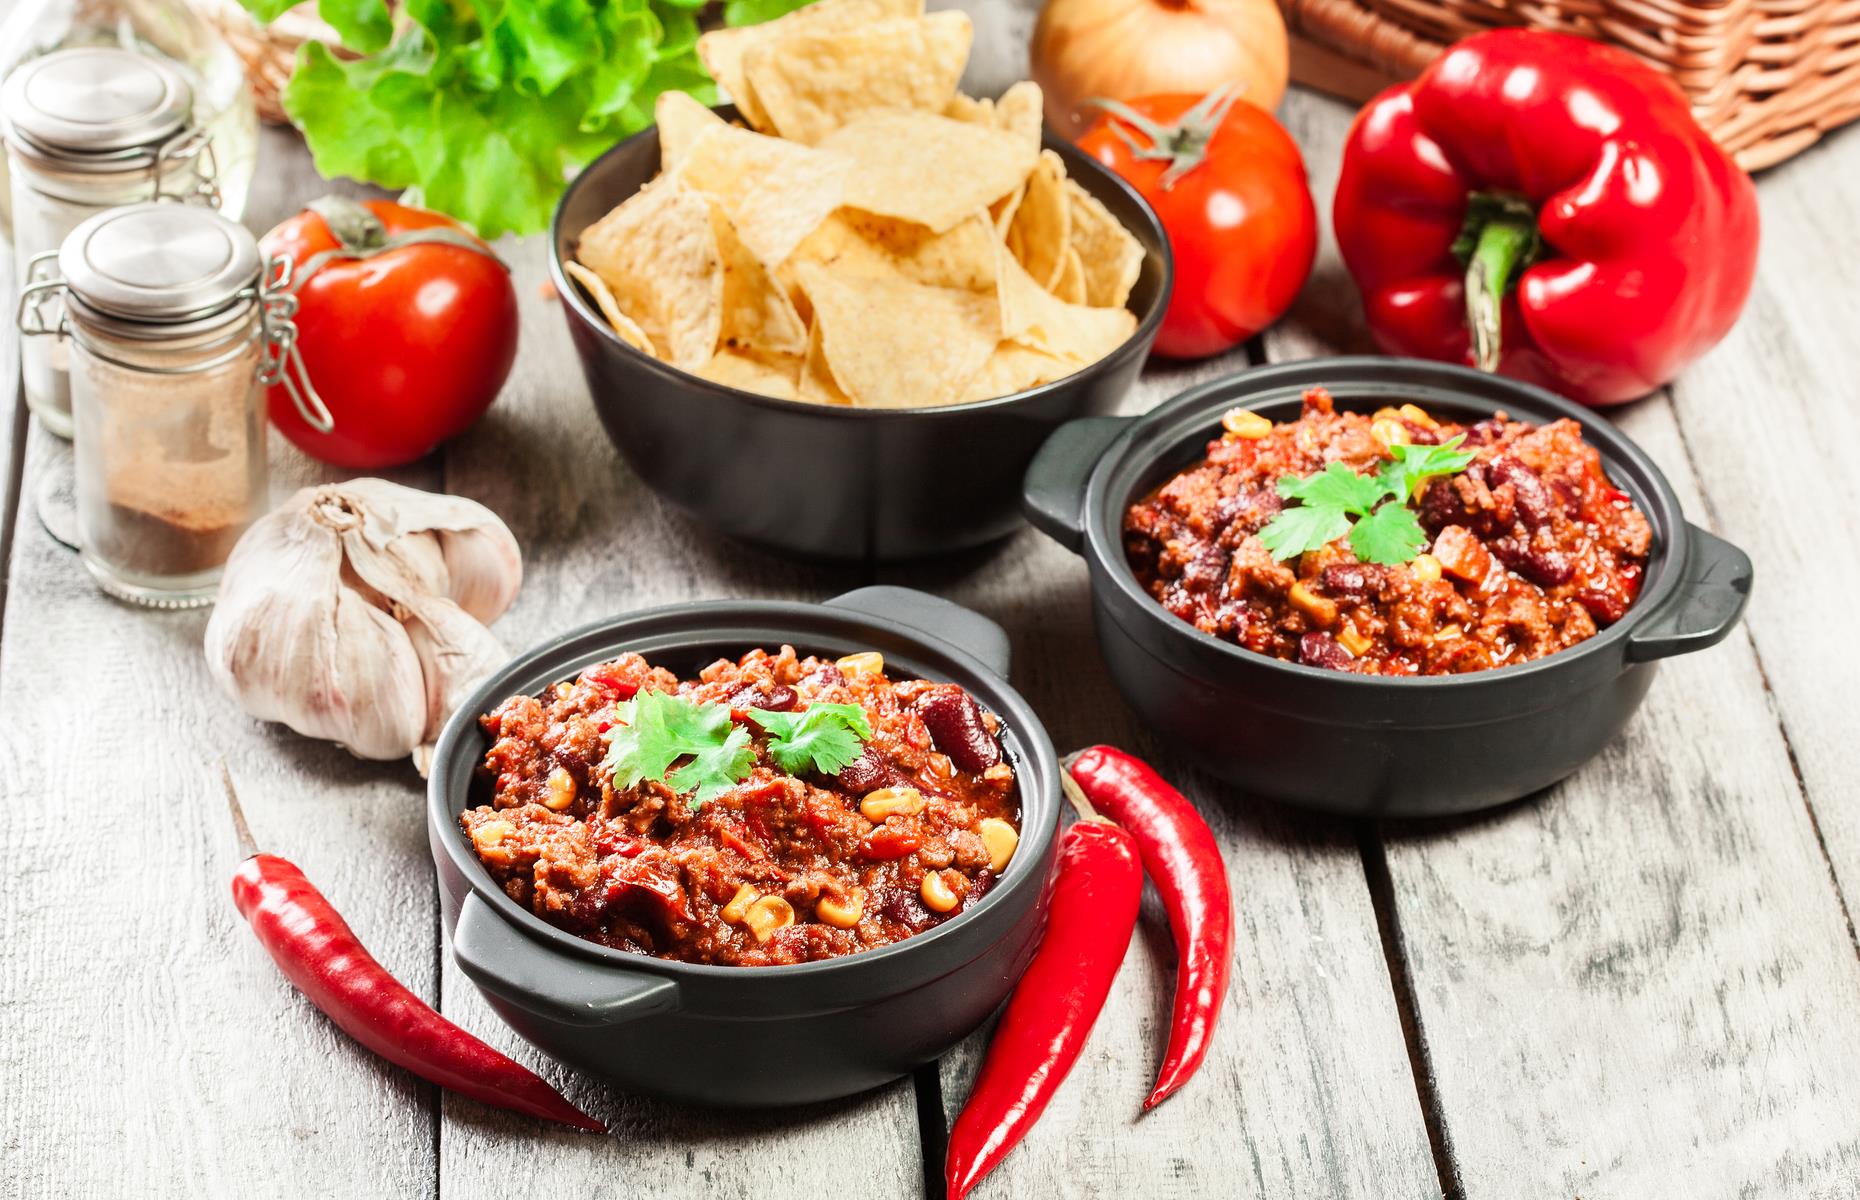 <p>A spicy, smoky ‘bowl o’red’ became Texas’ official meal in 1977, declared by the state legislature. The <a href="https://www.nationalchiliday.com/chili-history.html#.X0Jv_ZNKgUs">origins of chili</a> have been hotly debated, with some arguing it’s based on Mexican cuisine and others suggesting it was brought over from the Canary Islands. The Texan dish, though, was famously ladled out in a San Antonio market by so-called ‘chili queens’ in the late 19th-century, becoming a tourist attraction and spawning chili joints throughout the state.</p>